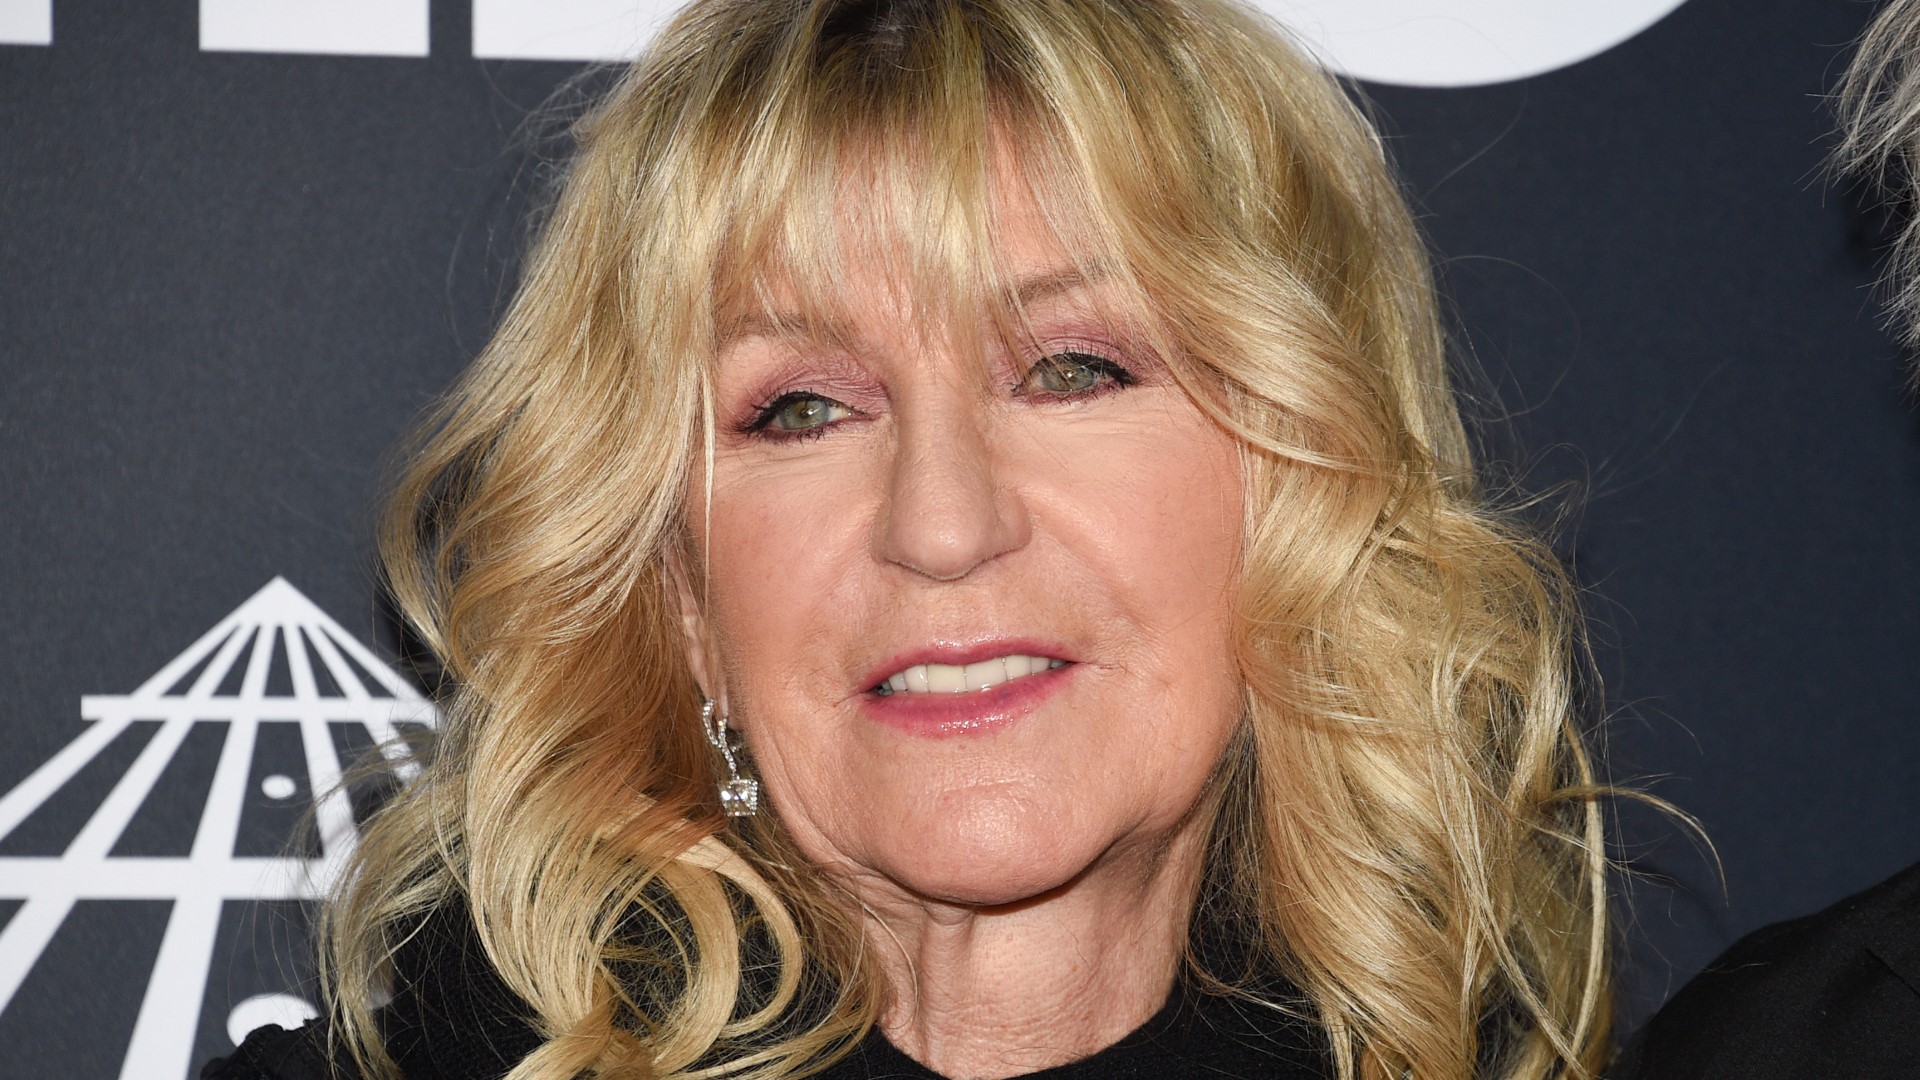 The band announced her death on social media Wednesday, saying “there are no words to describe our sadness at the passing of Christine McVie.”